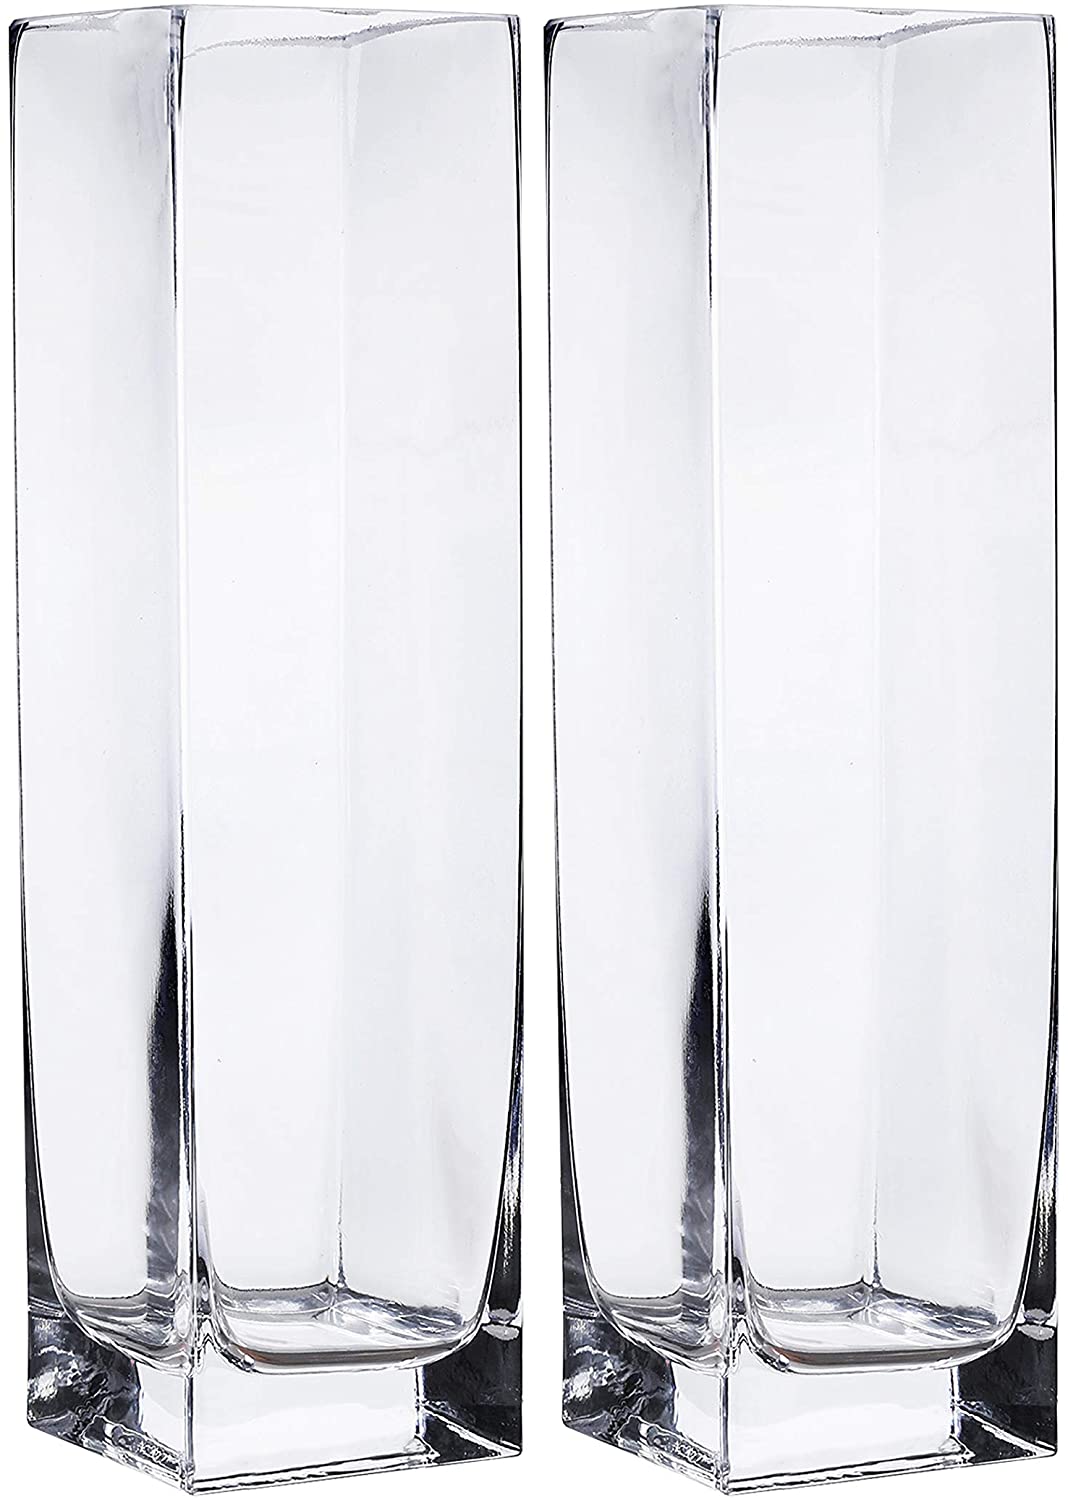 WHOLE HOUSEWARES Clear Glass Square Vase for Centerpieces | Tall Block Design for Wedding Party Event Home Office Decor | 2.35" Diameter x 10" Height | Clear Glass Vases Centerpieces - image 1 of 4